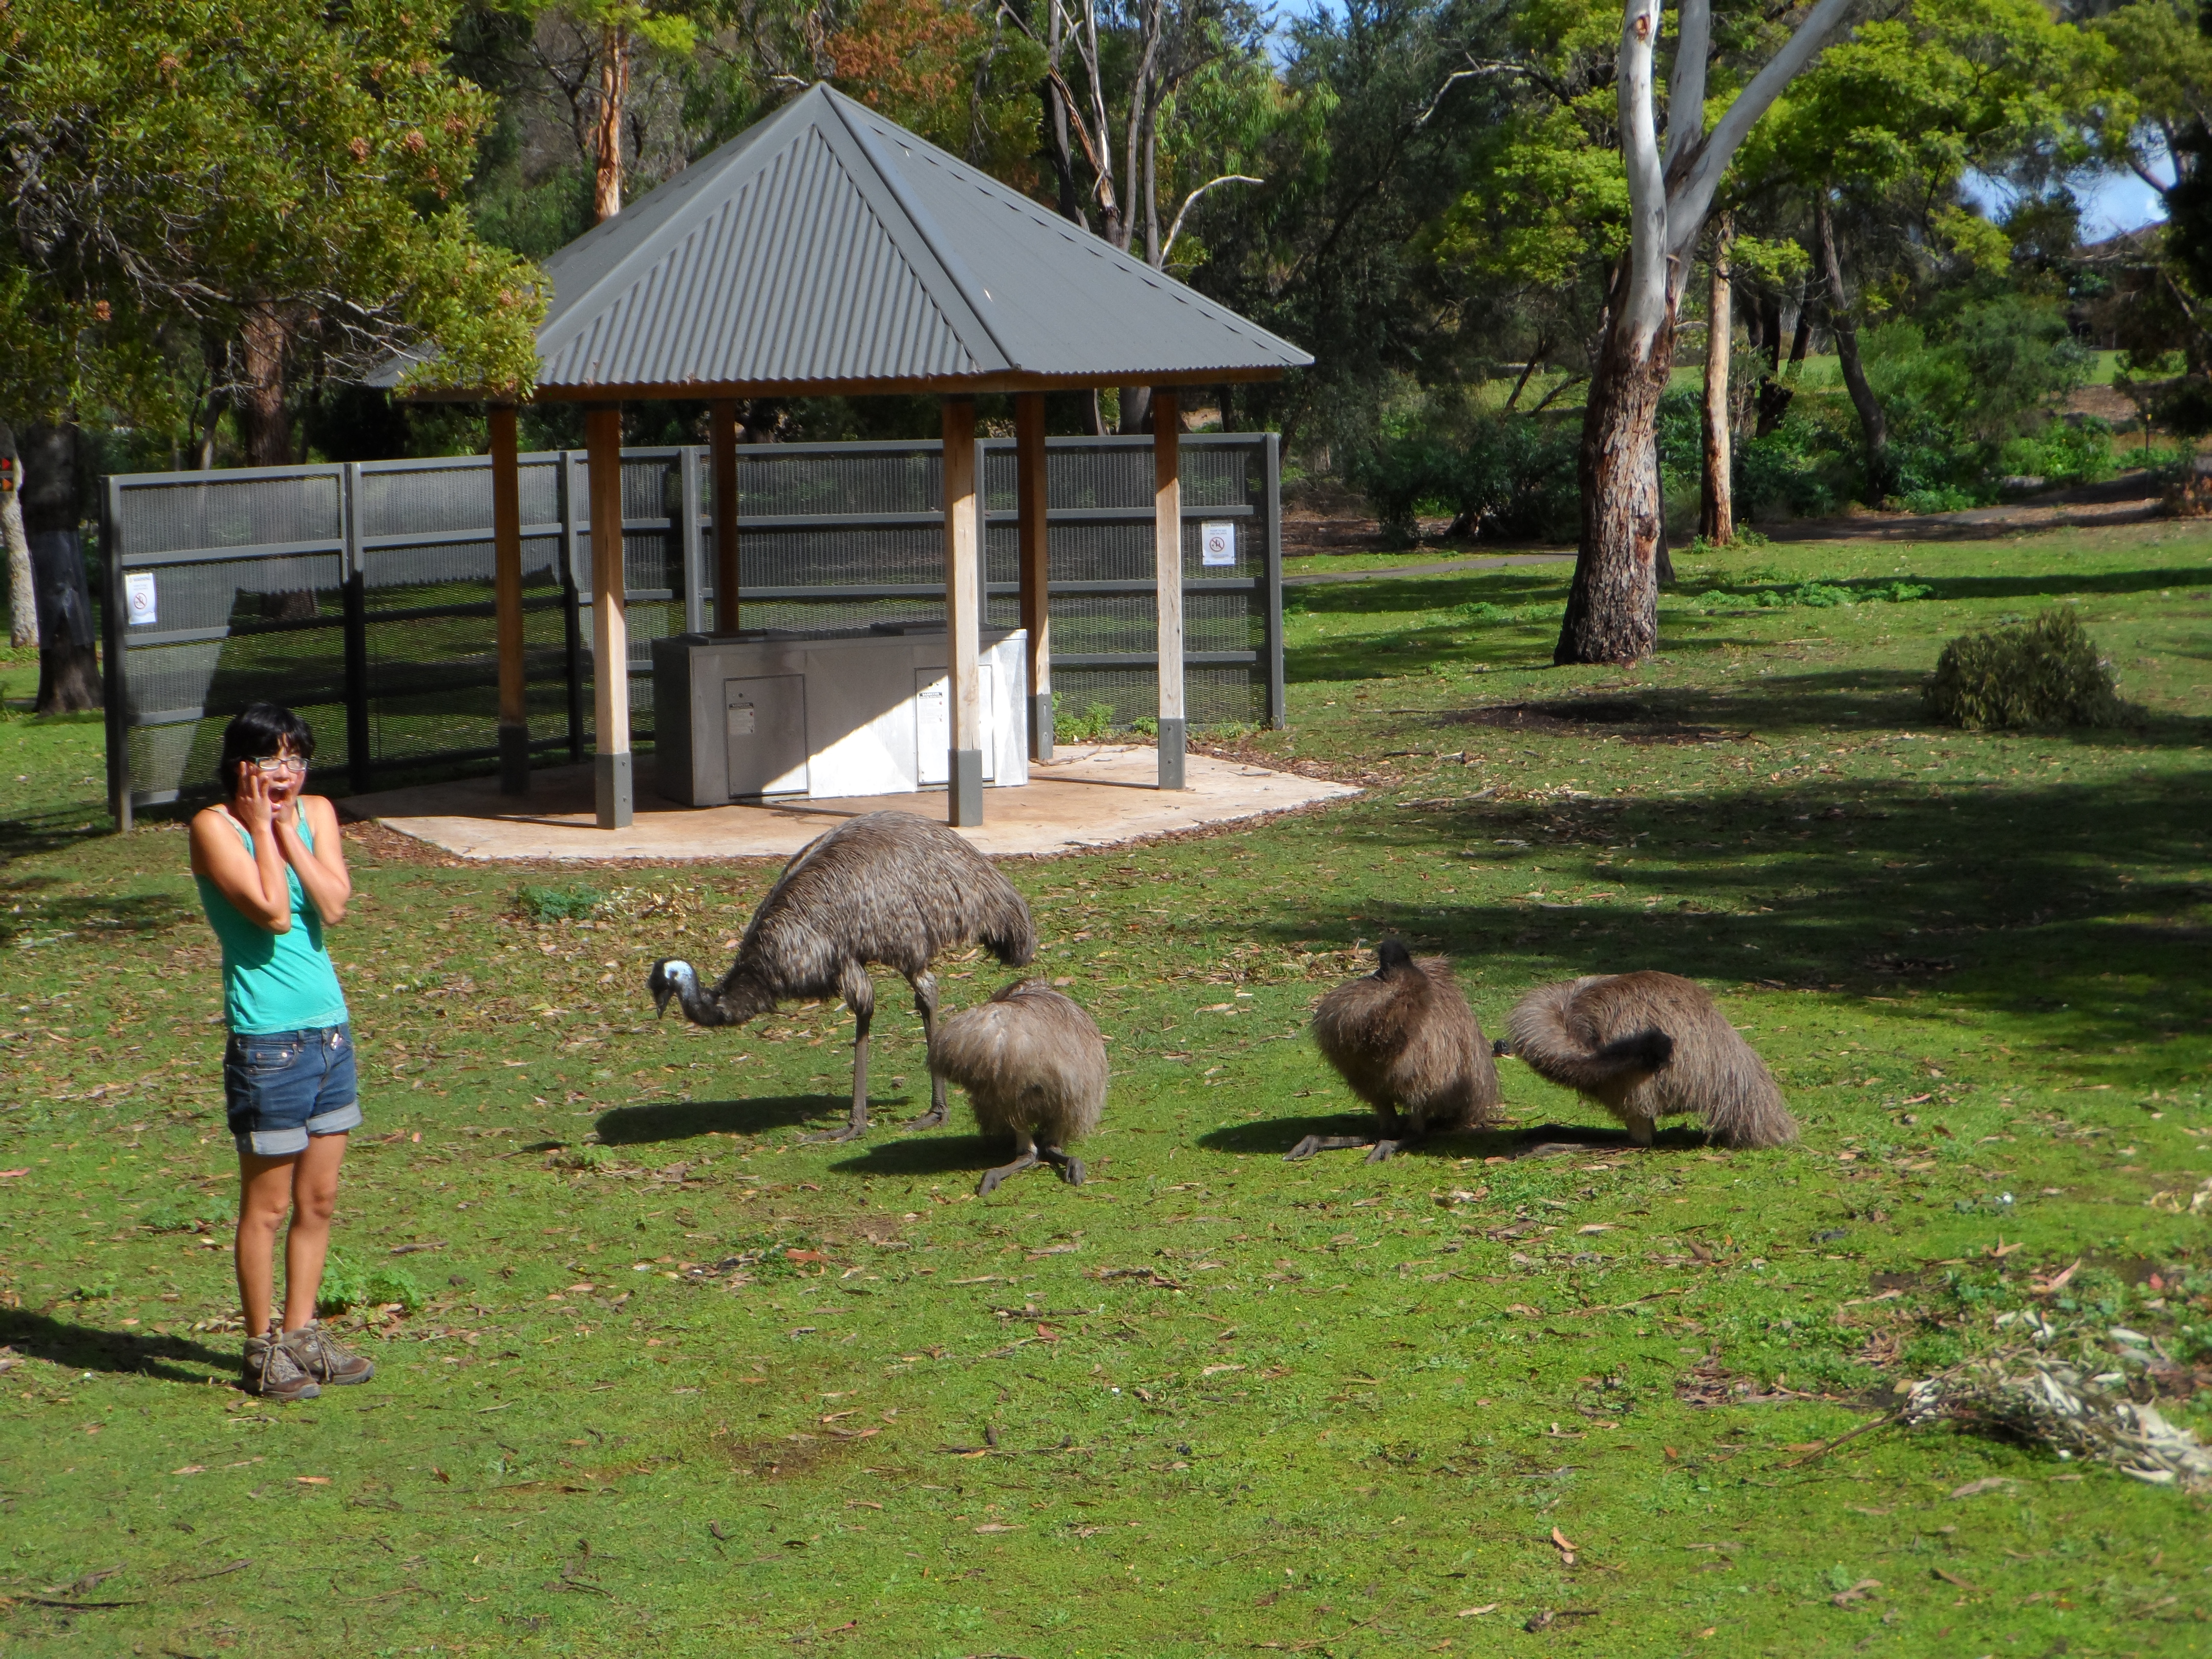 Lifelong Vagabonds posing with emus at Tower Hill Nature Reserve in Victoria